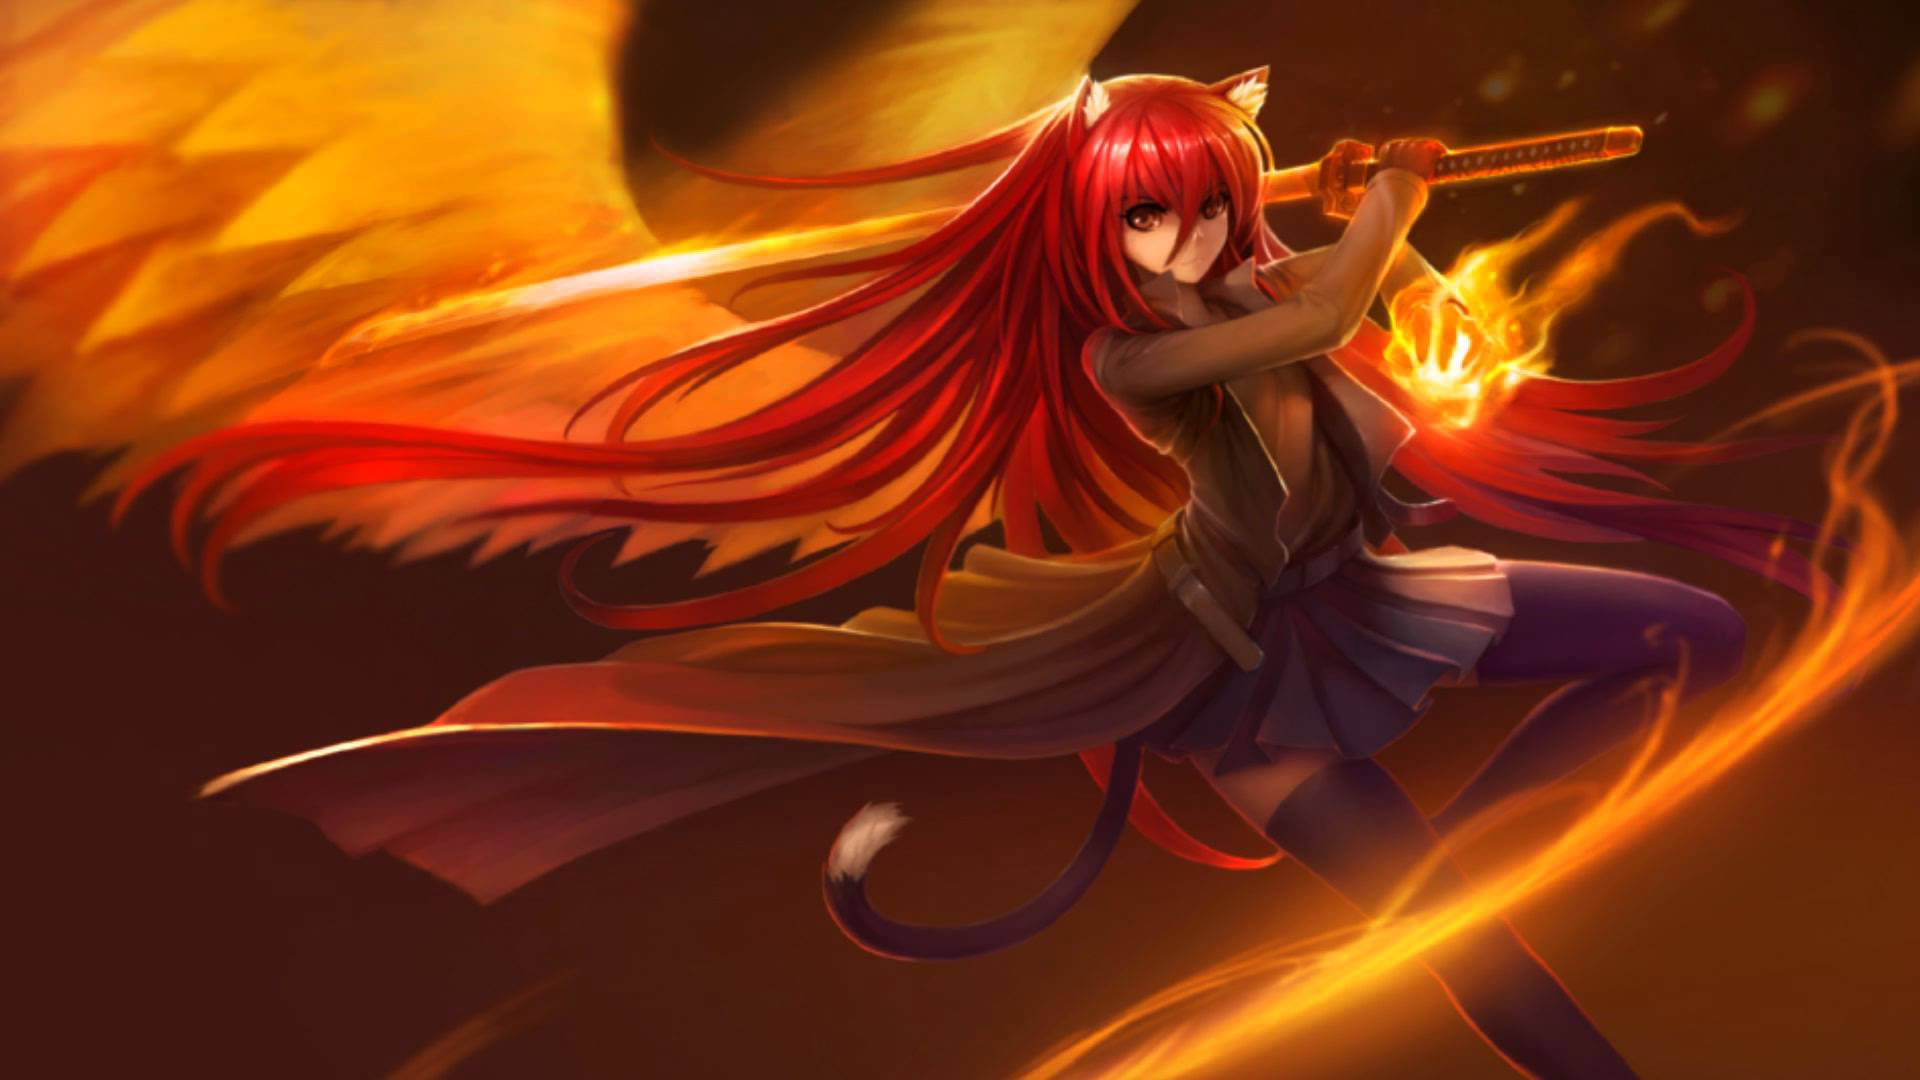 Cat Warrior Girl With Fire Wings